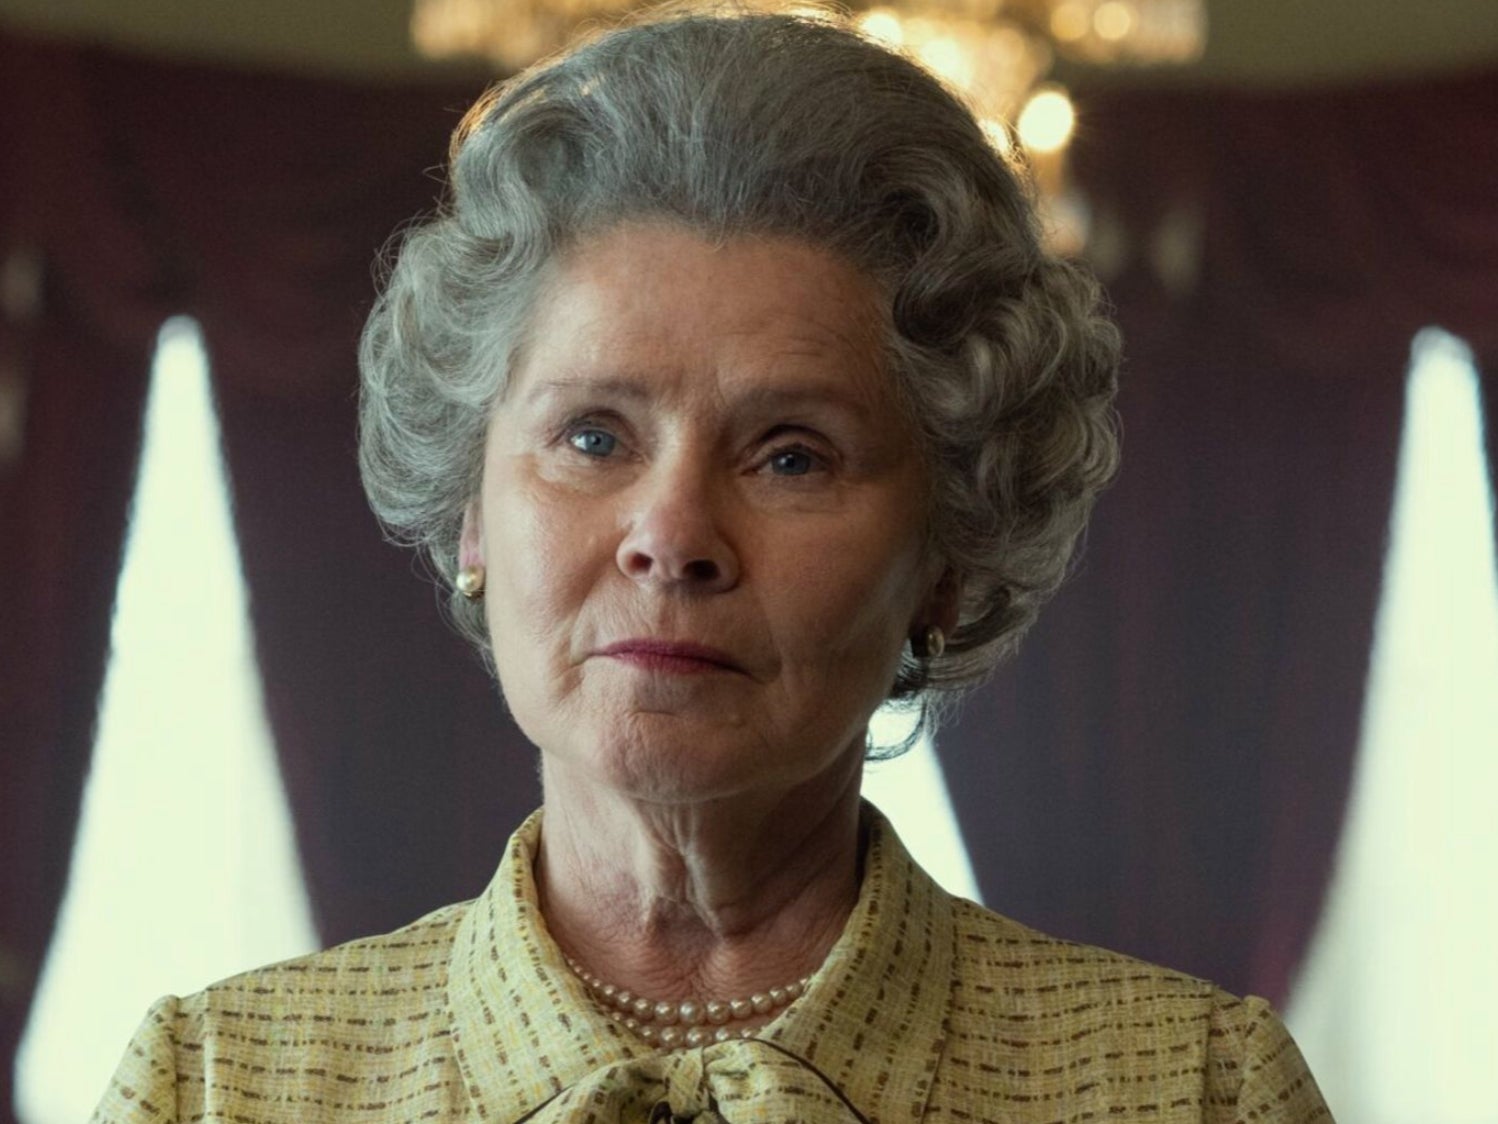 Imelda Staunton, seen here in The Crown, is also objecting